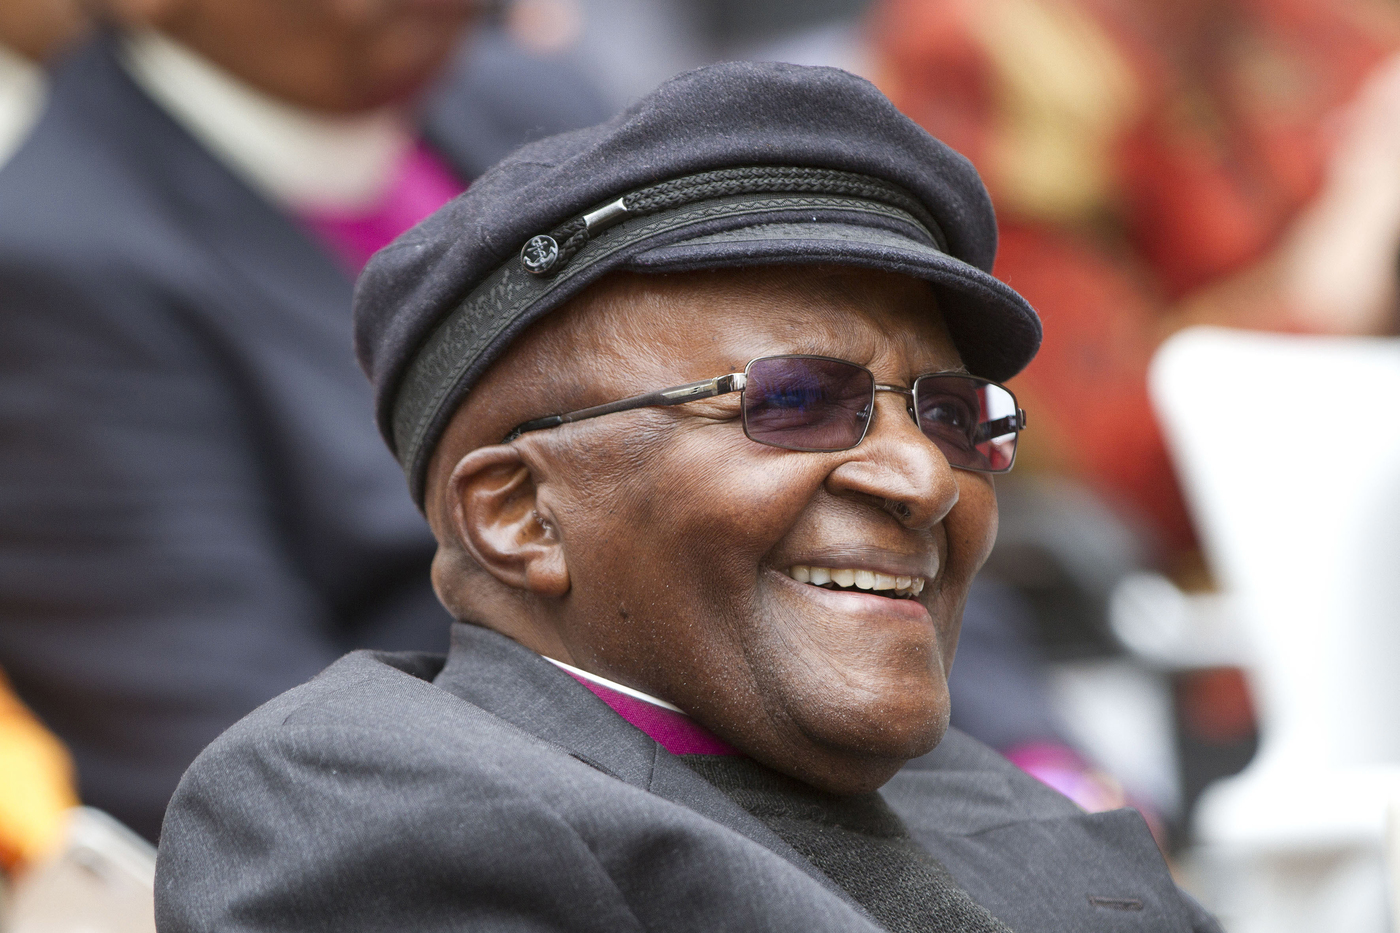 FILE - Anglican Archbishop Emeritus Desmond Tutu smiles as he celebrates his 86th birthday in Cape Town South Africa, Saturday, Oct. 7, 2017. Tutu, South Africa’s Nobel Peace Prize-winning activist for racial justice and LGBT rights and retired Anglican Archbishop of Cape Town, has died, South African President Cyril Ramaphosa announced Sunday Dec. 26, 2021. He was 90. (AP Photo/Mark Wessels, File)